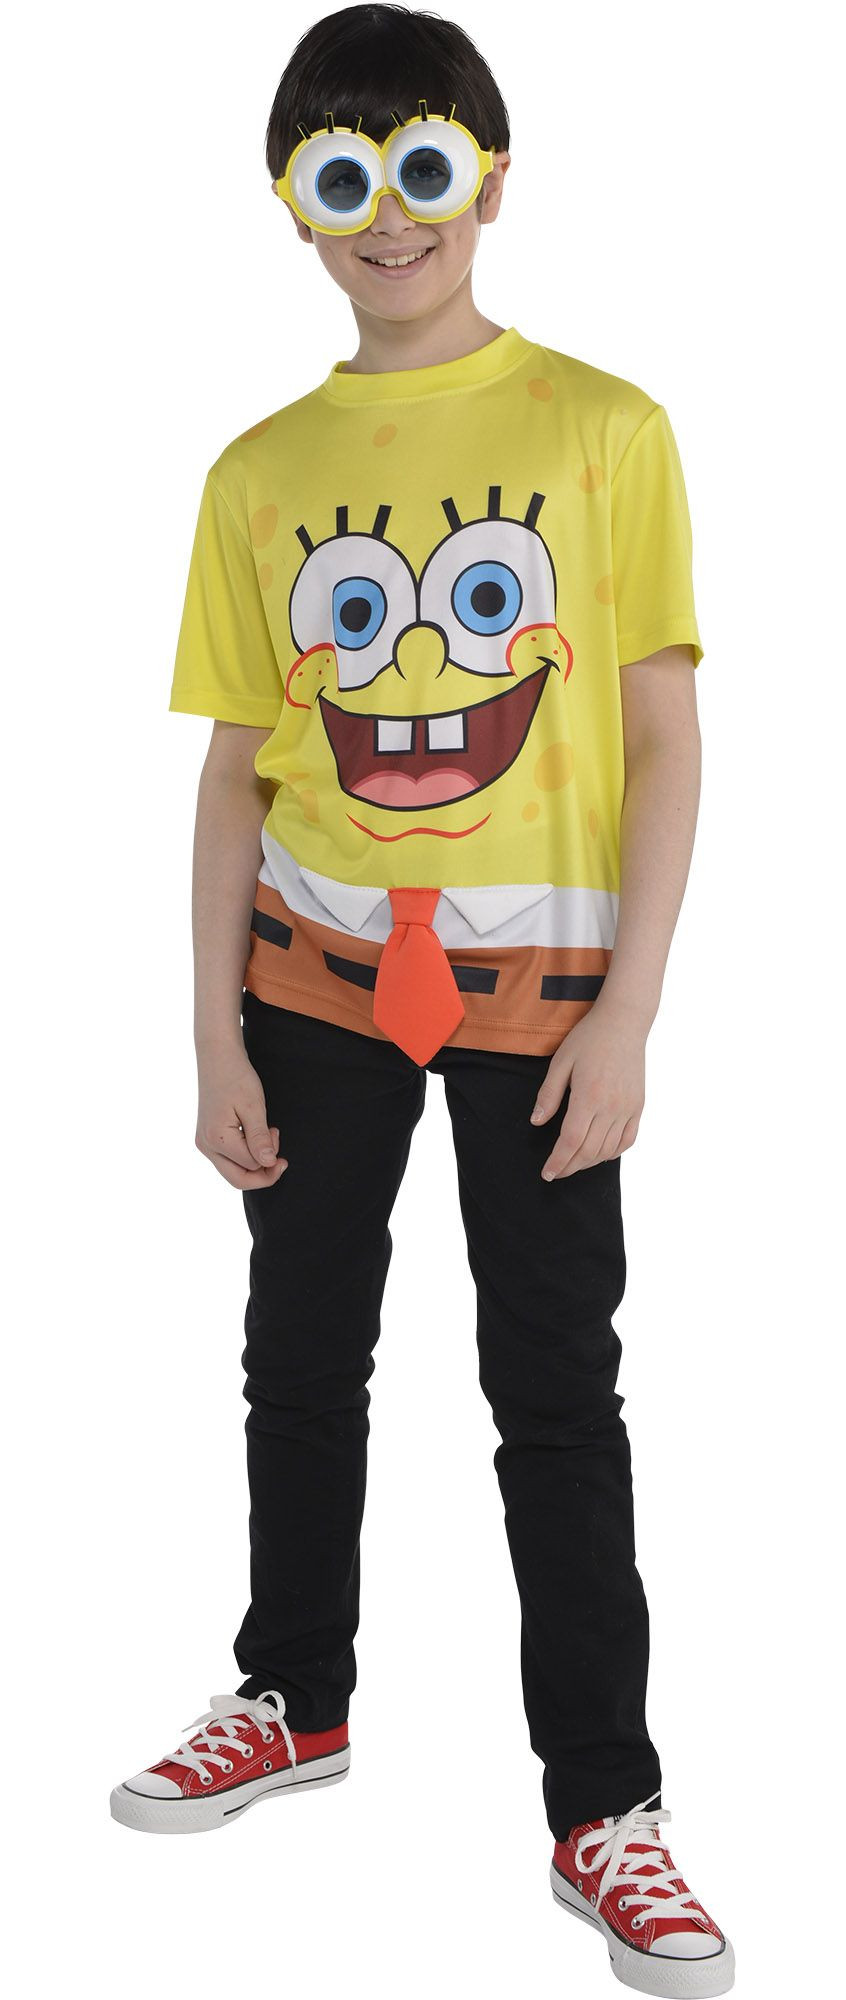 Party City Costumes Kids Boys
 Create Your Own Boys SpongeBob Costume Accessories